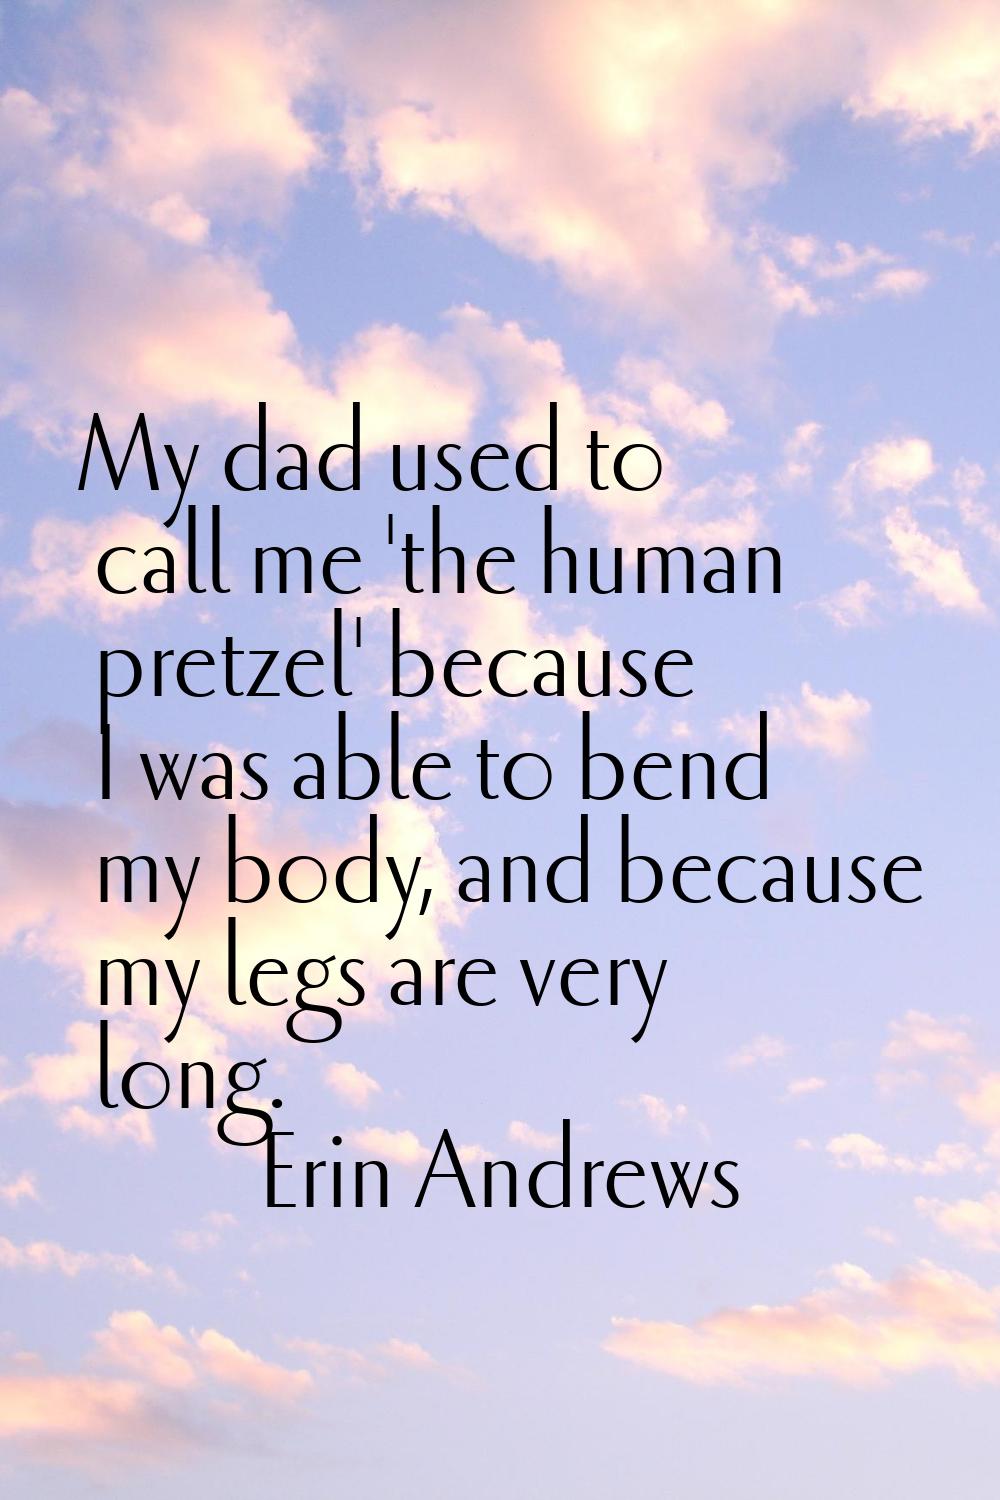 My dad used to call me 'the human pretzel' because I was able to bend my body, and because my legs 